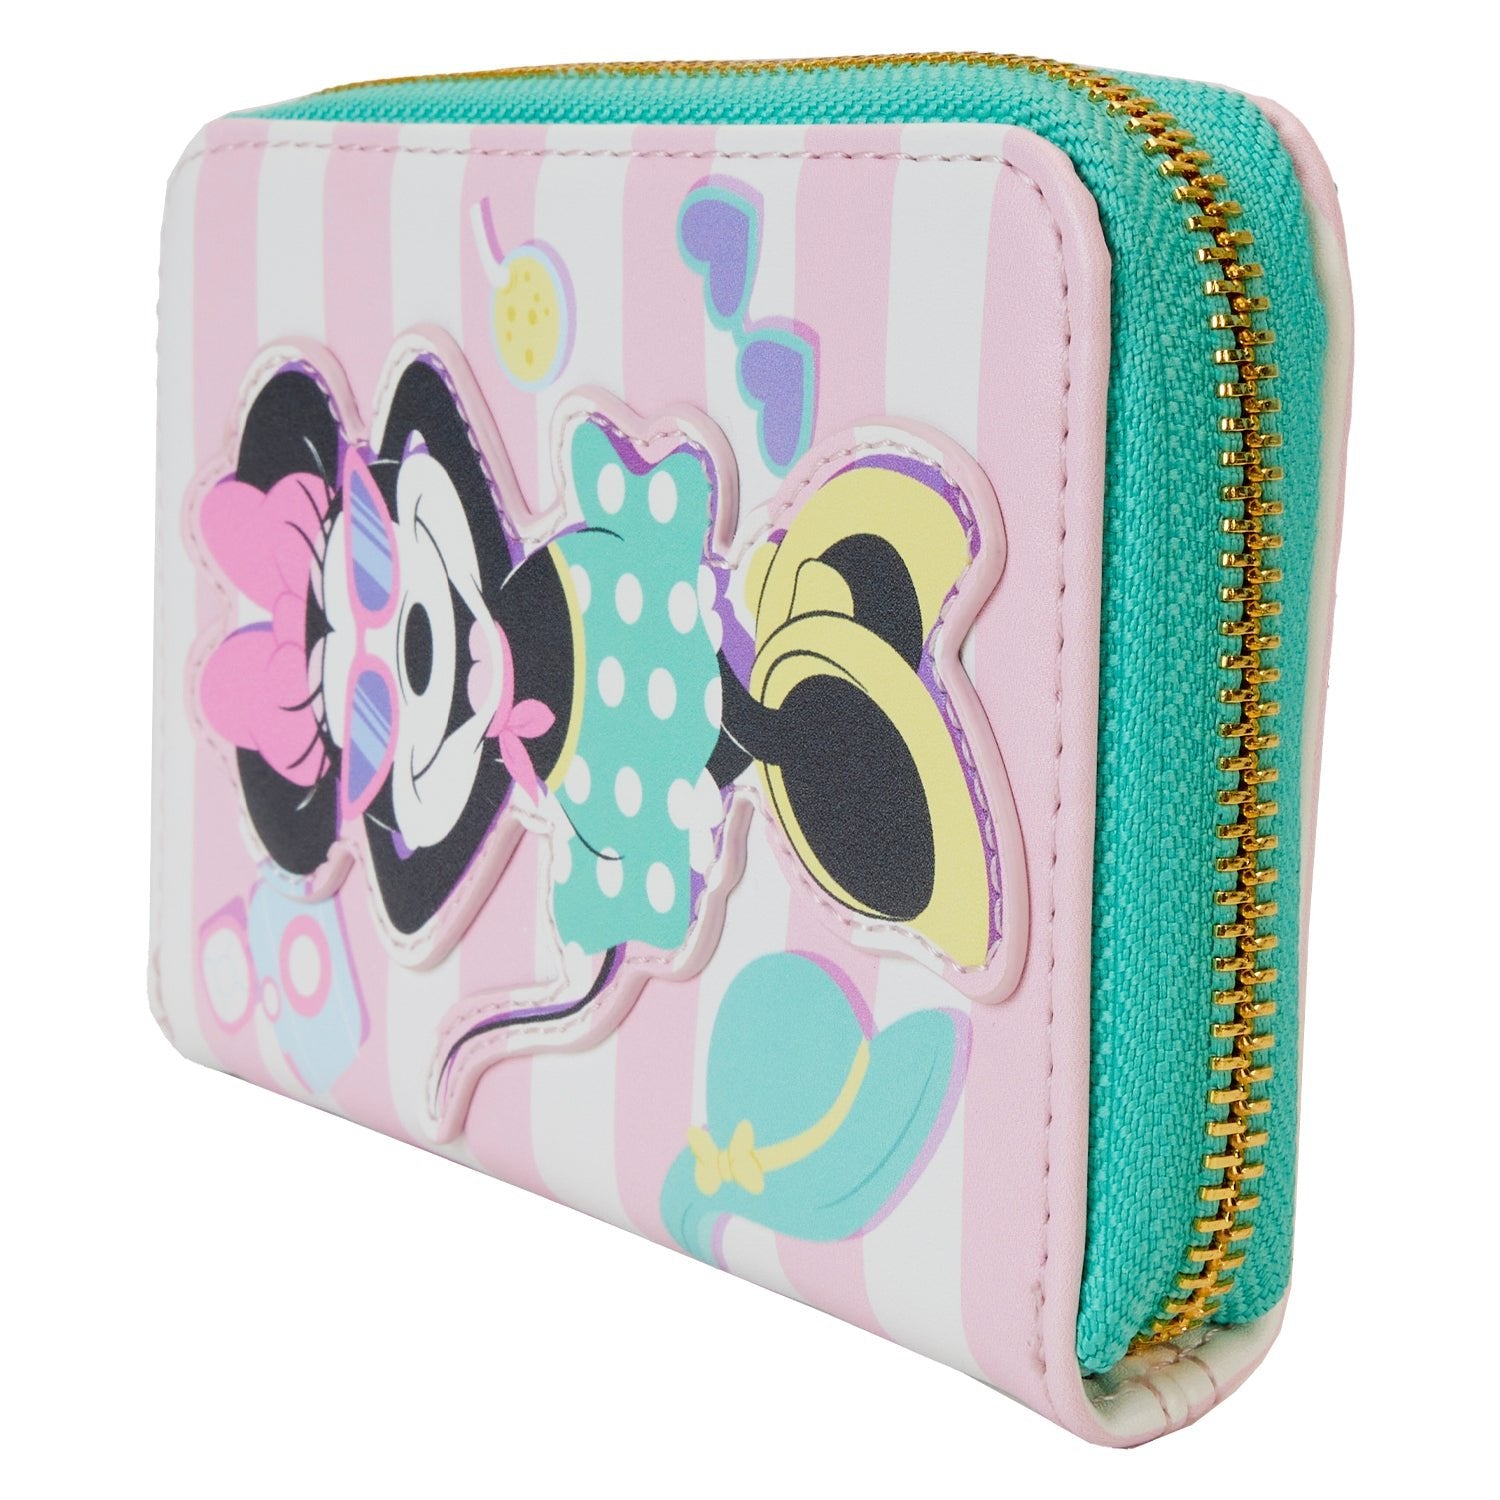 Loungefly x Disney Minnie Mouse Vacation Style Zip Around Wallet - GeekCore